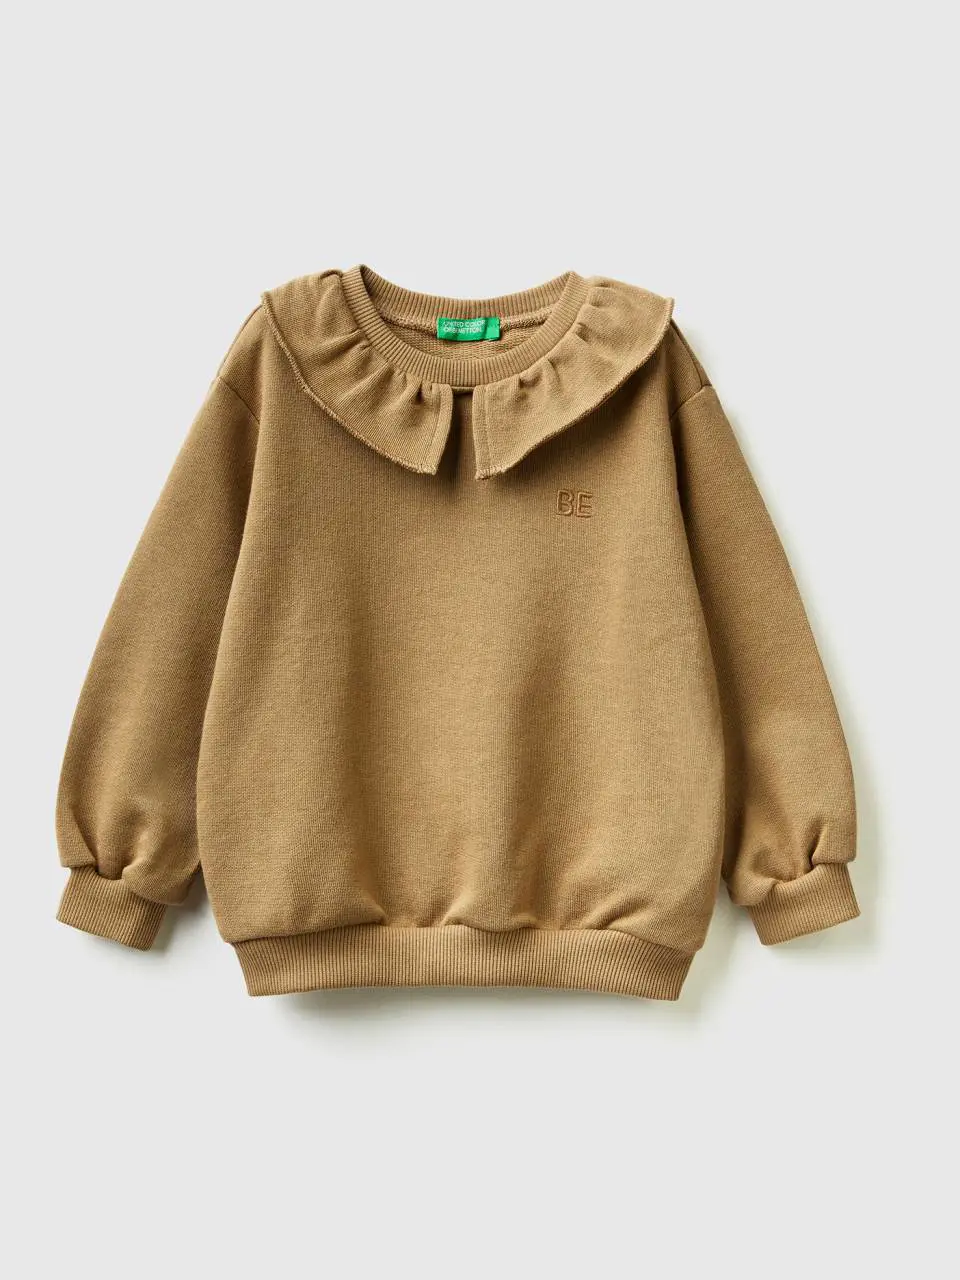 Benetton sweatshirt with collar and "be" embroidery. 1